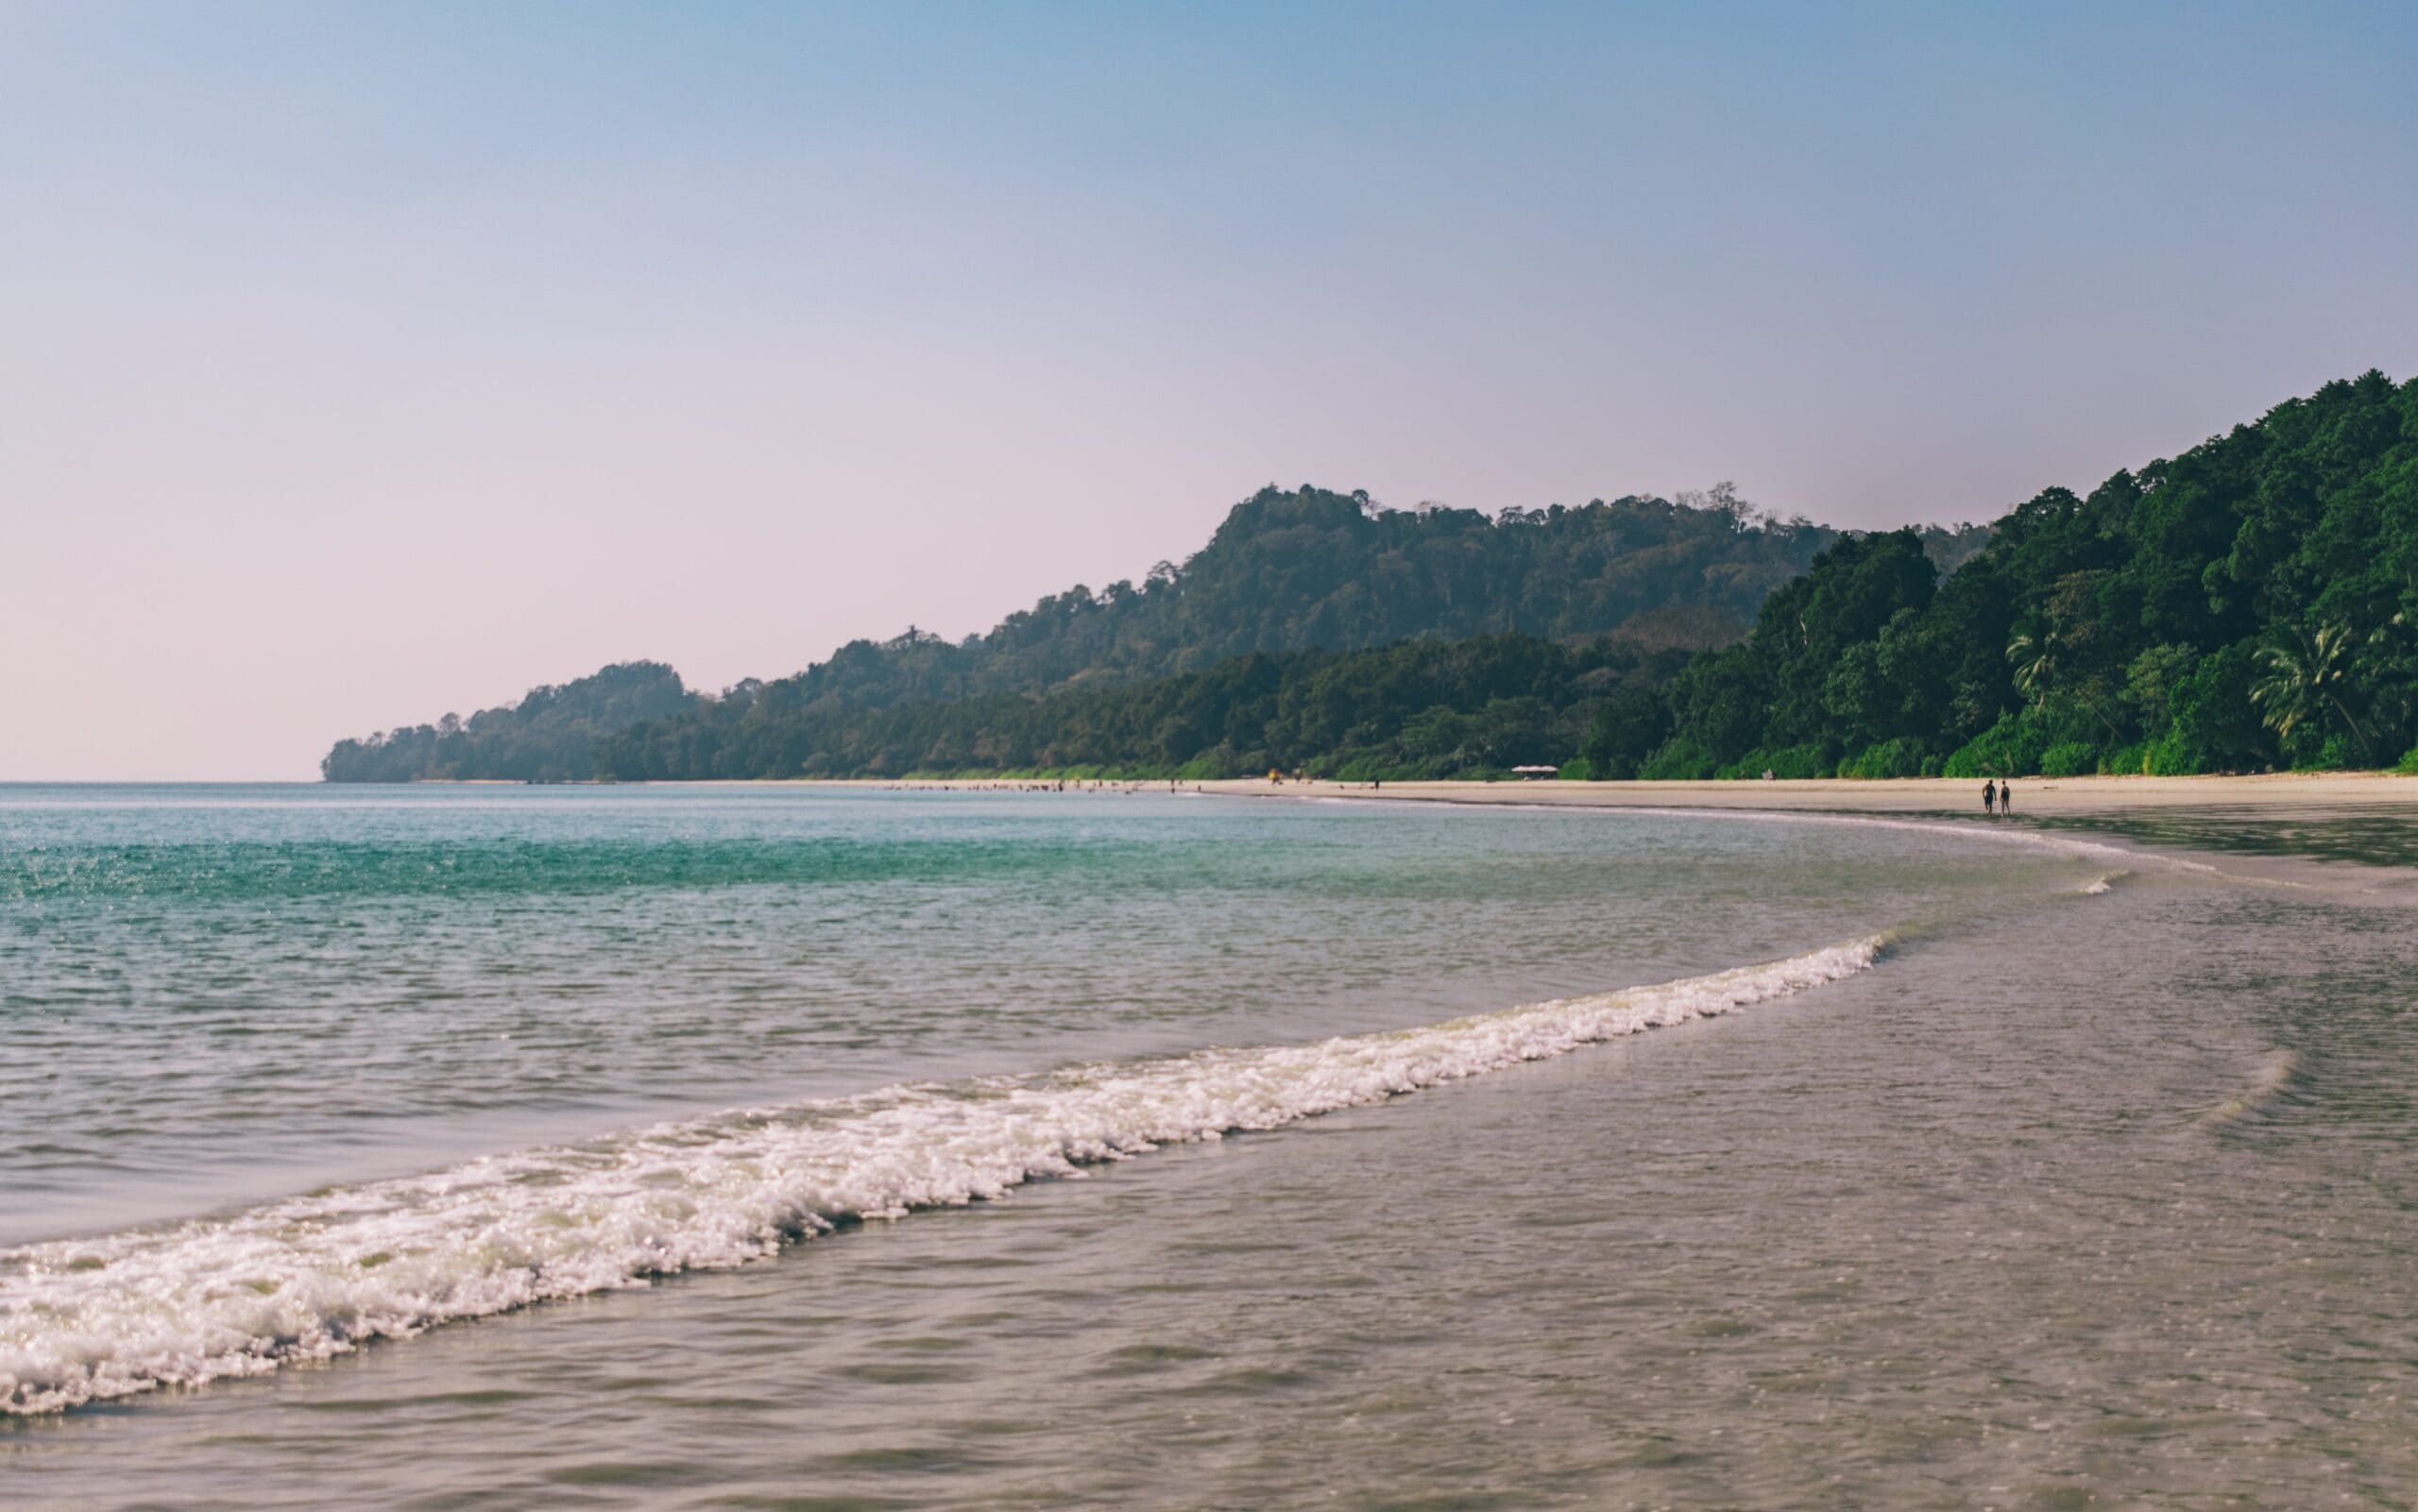 8. Which of the following is not a famous beach in Andaman & Nicobar Island?